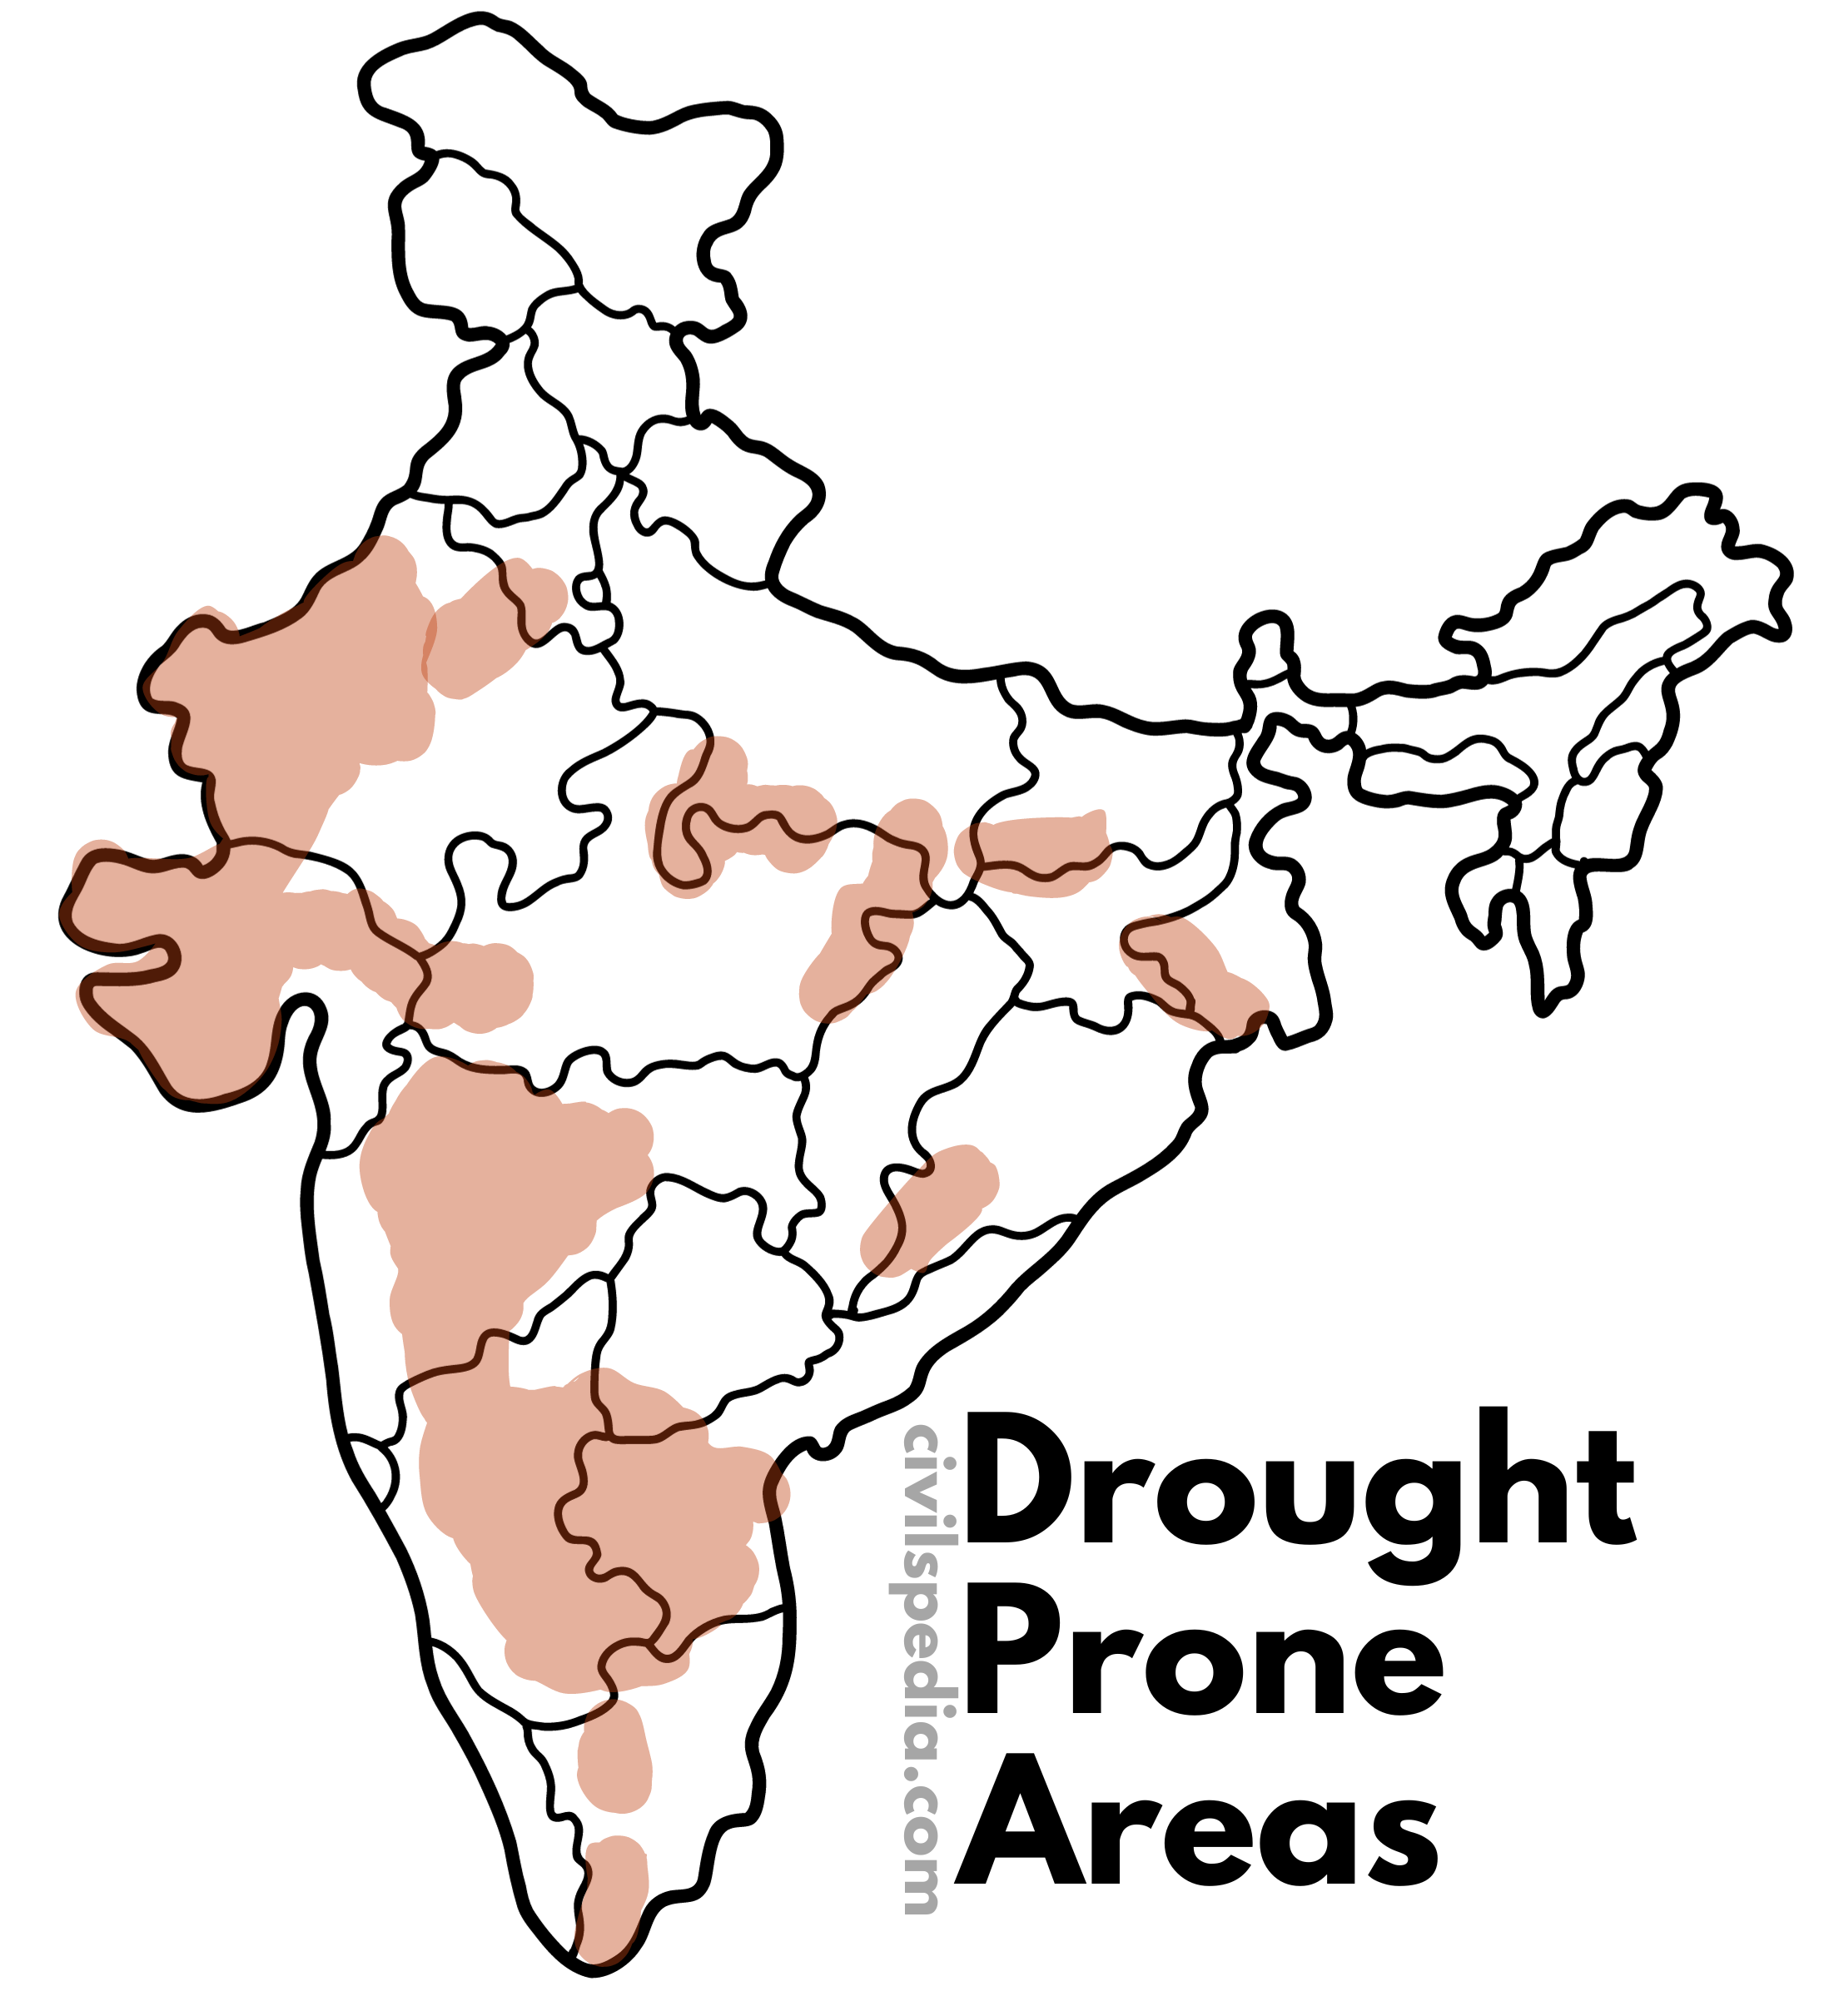 Drought Prone Areas in India